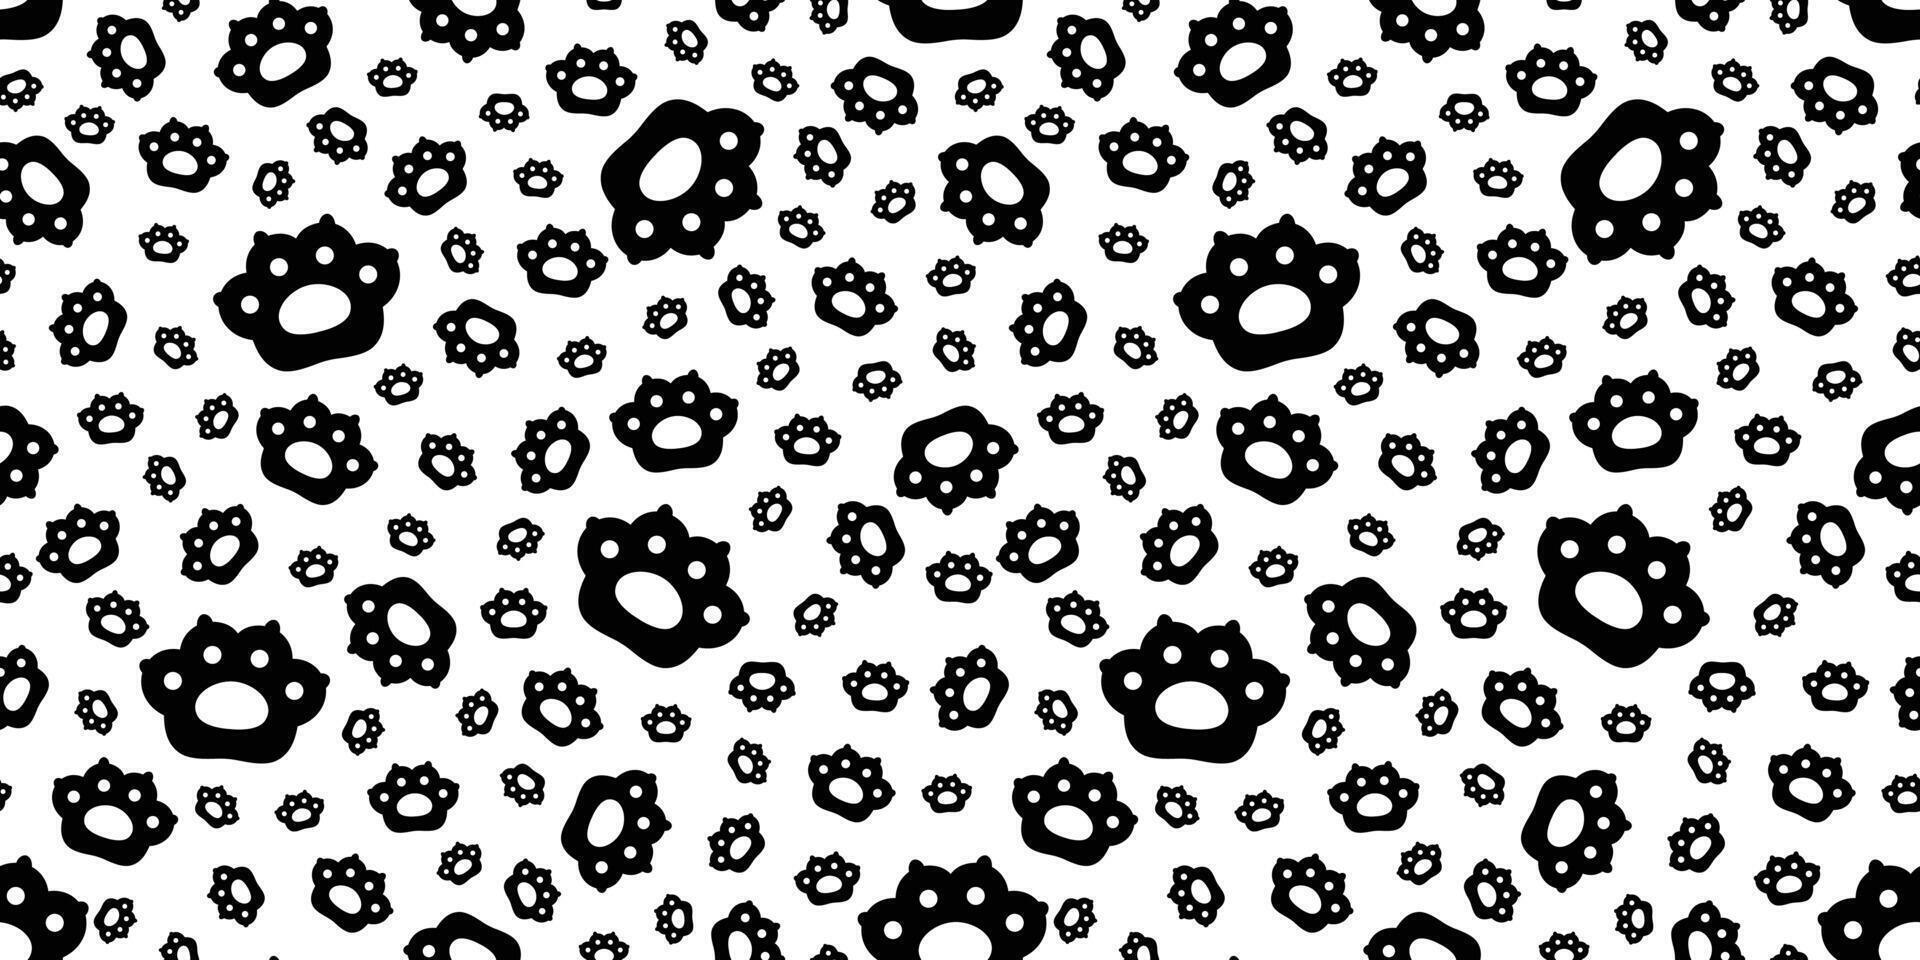 cat paw seamless pattern dog footprint french bulldog claw vector cartoon icon repeat wallpaper scarf isolated tile background shadow doodle illustration design